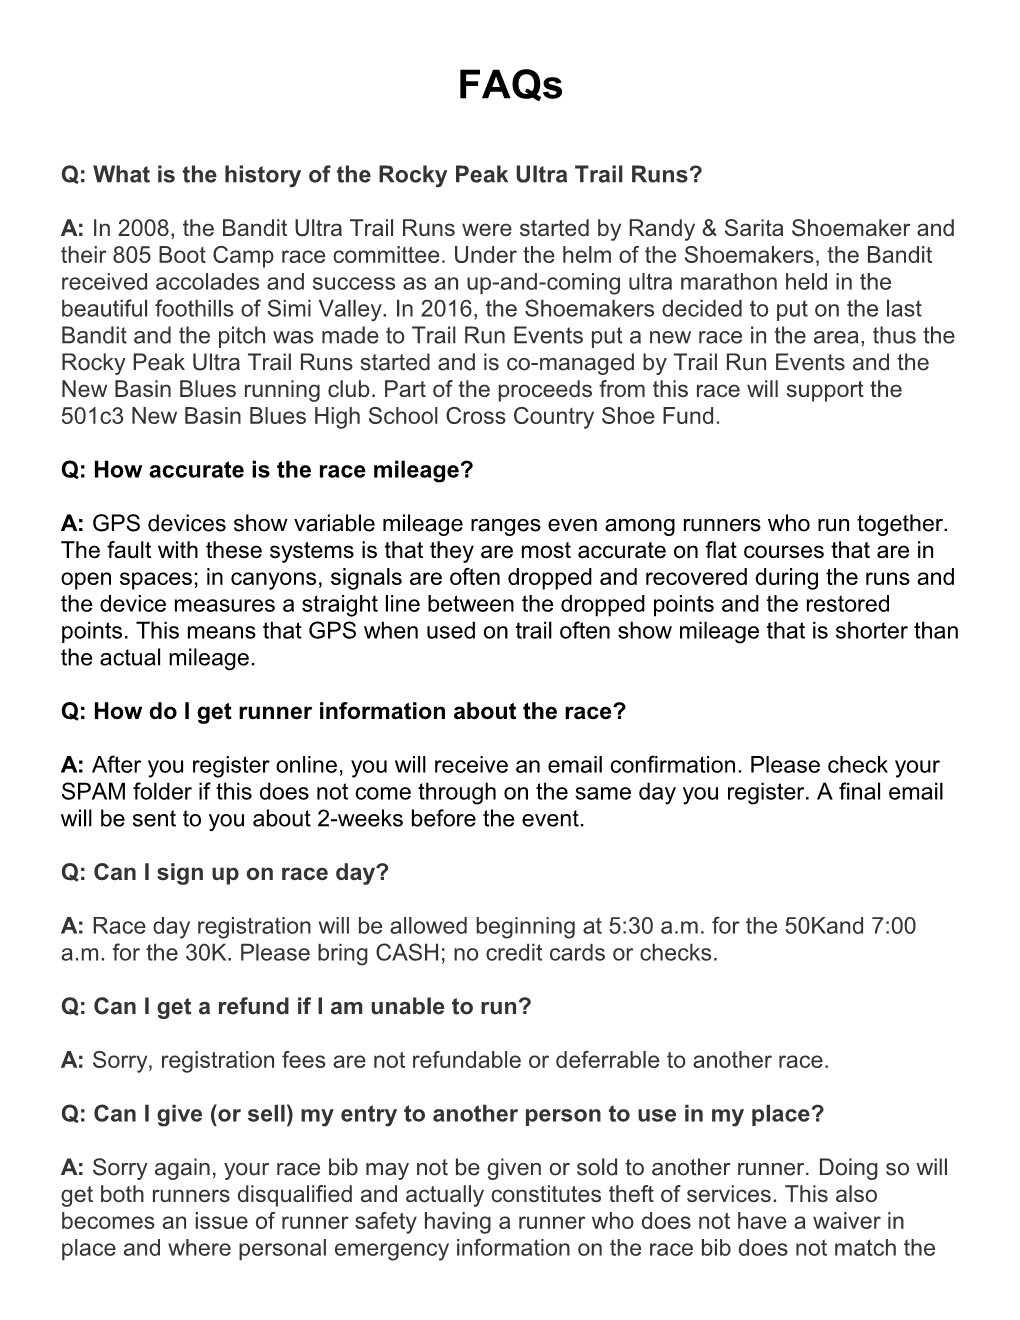 Q: What Is the History of the Rocky Peak Ultra Trail Runs?